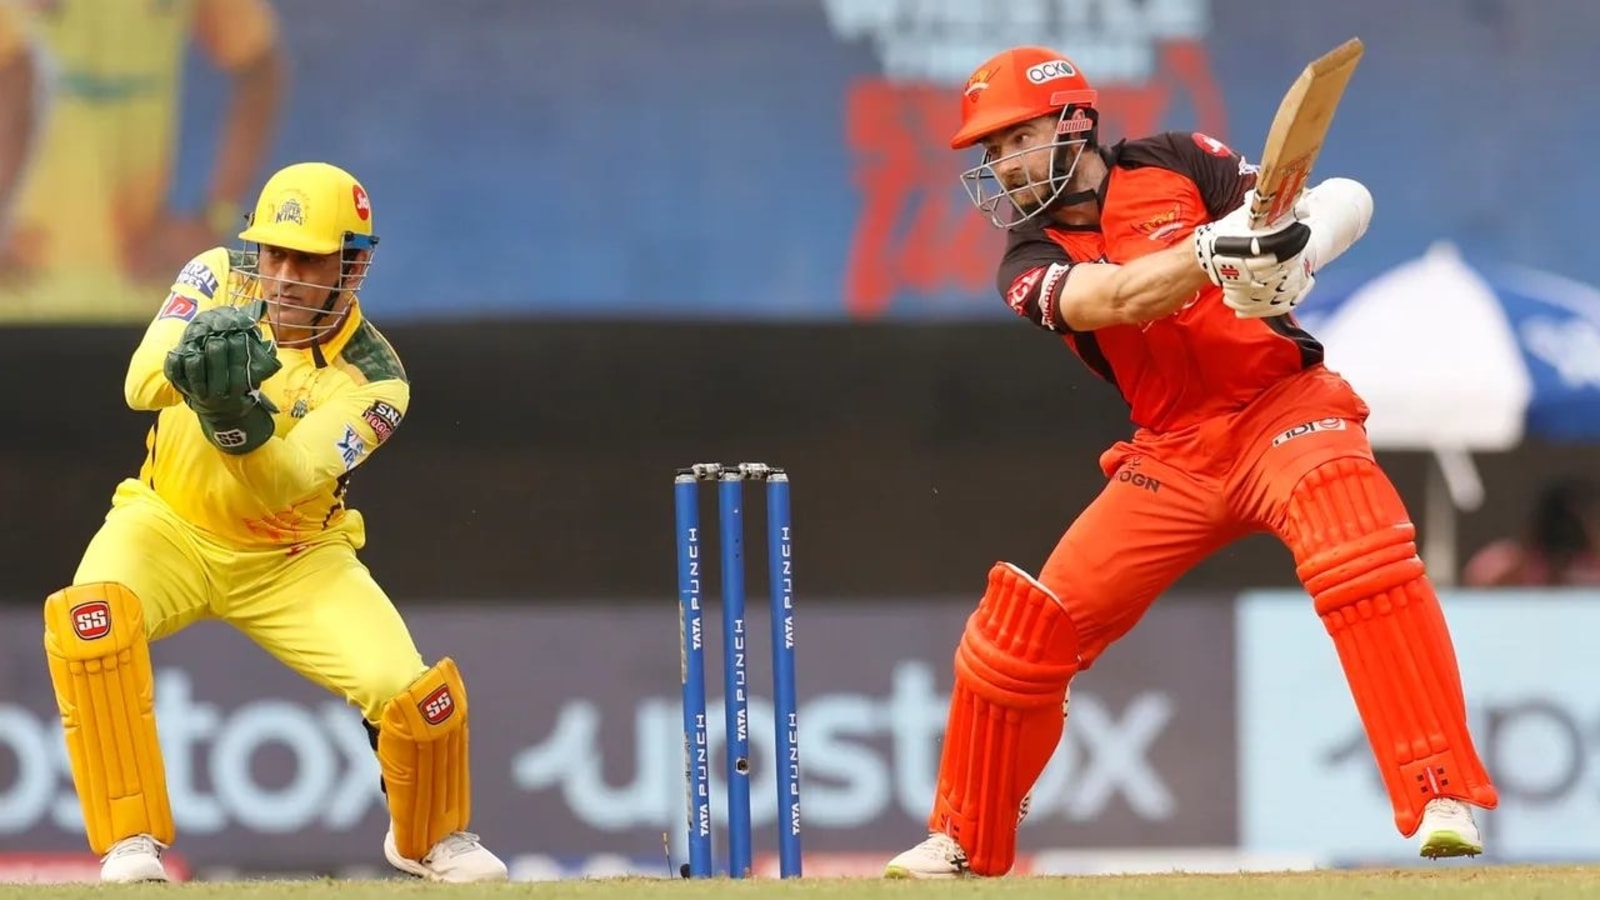 CSK vs SRH, IPL 2022 Highlights SRH cruise to eight-wicket win, CSK sink to 4th consecutive defeat Hindustan Times